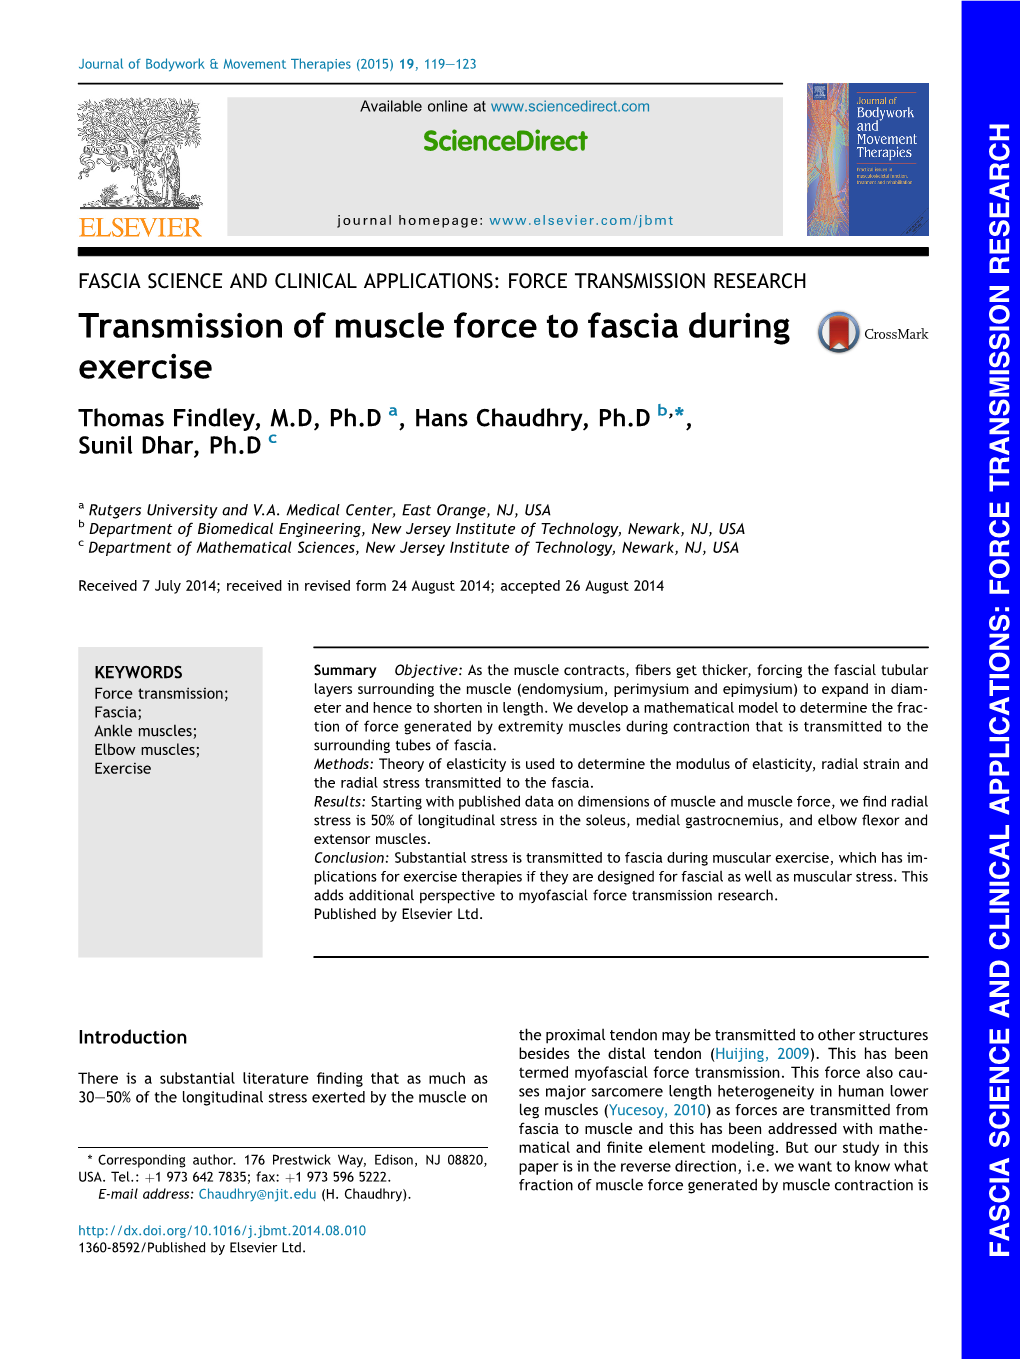 Transmission of Muscle Force to Fascia During Exercise Thomas Findley, M.D, Ph.D A, Hans Chaudhry, Ph.D B,*, Sunil Dhar, Ph.D C a Rutgers University and V.A